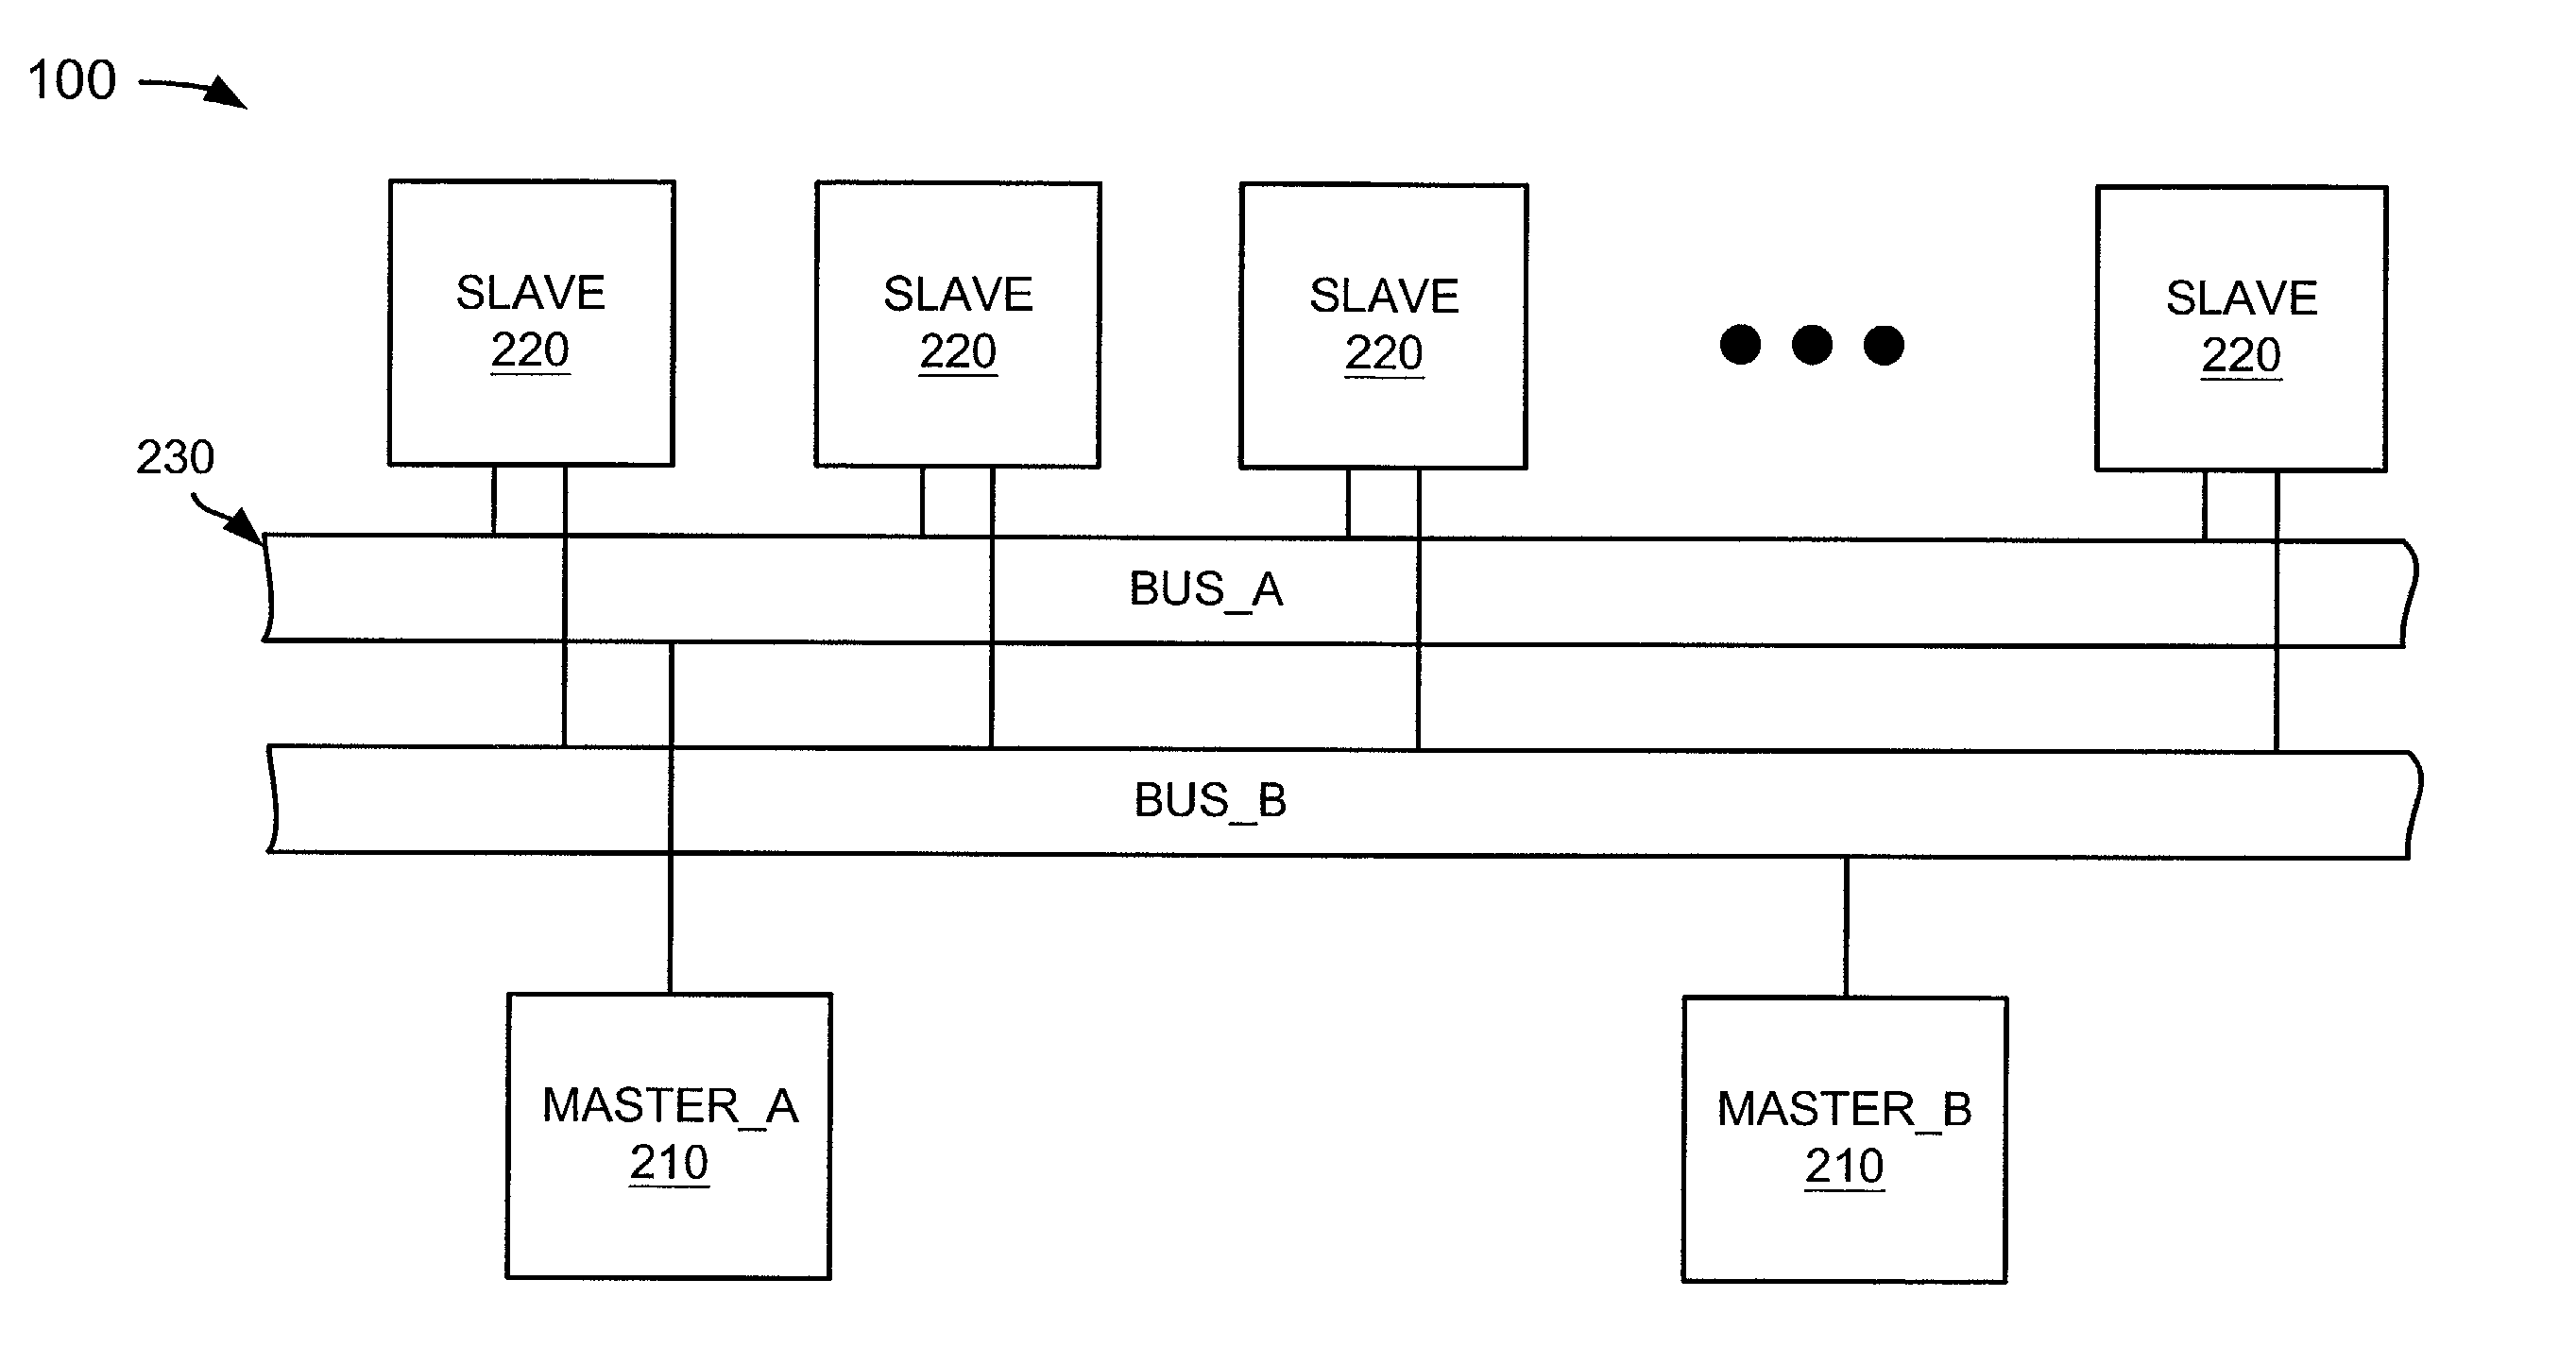 Reliable and redundant control signals in a multi-master system